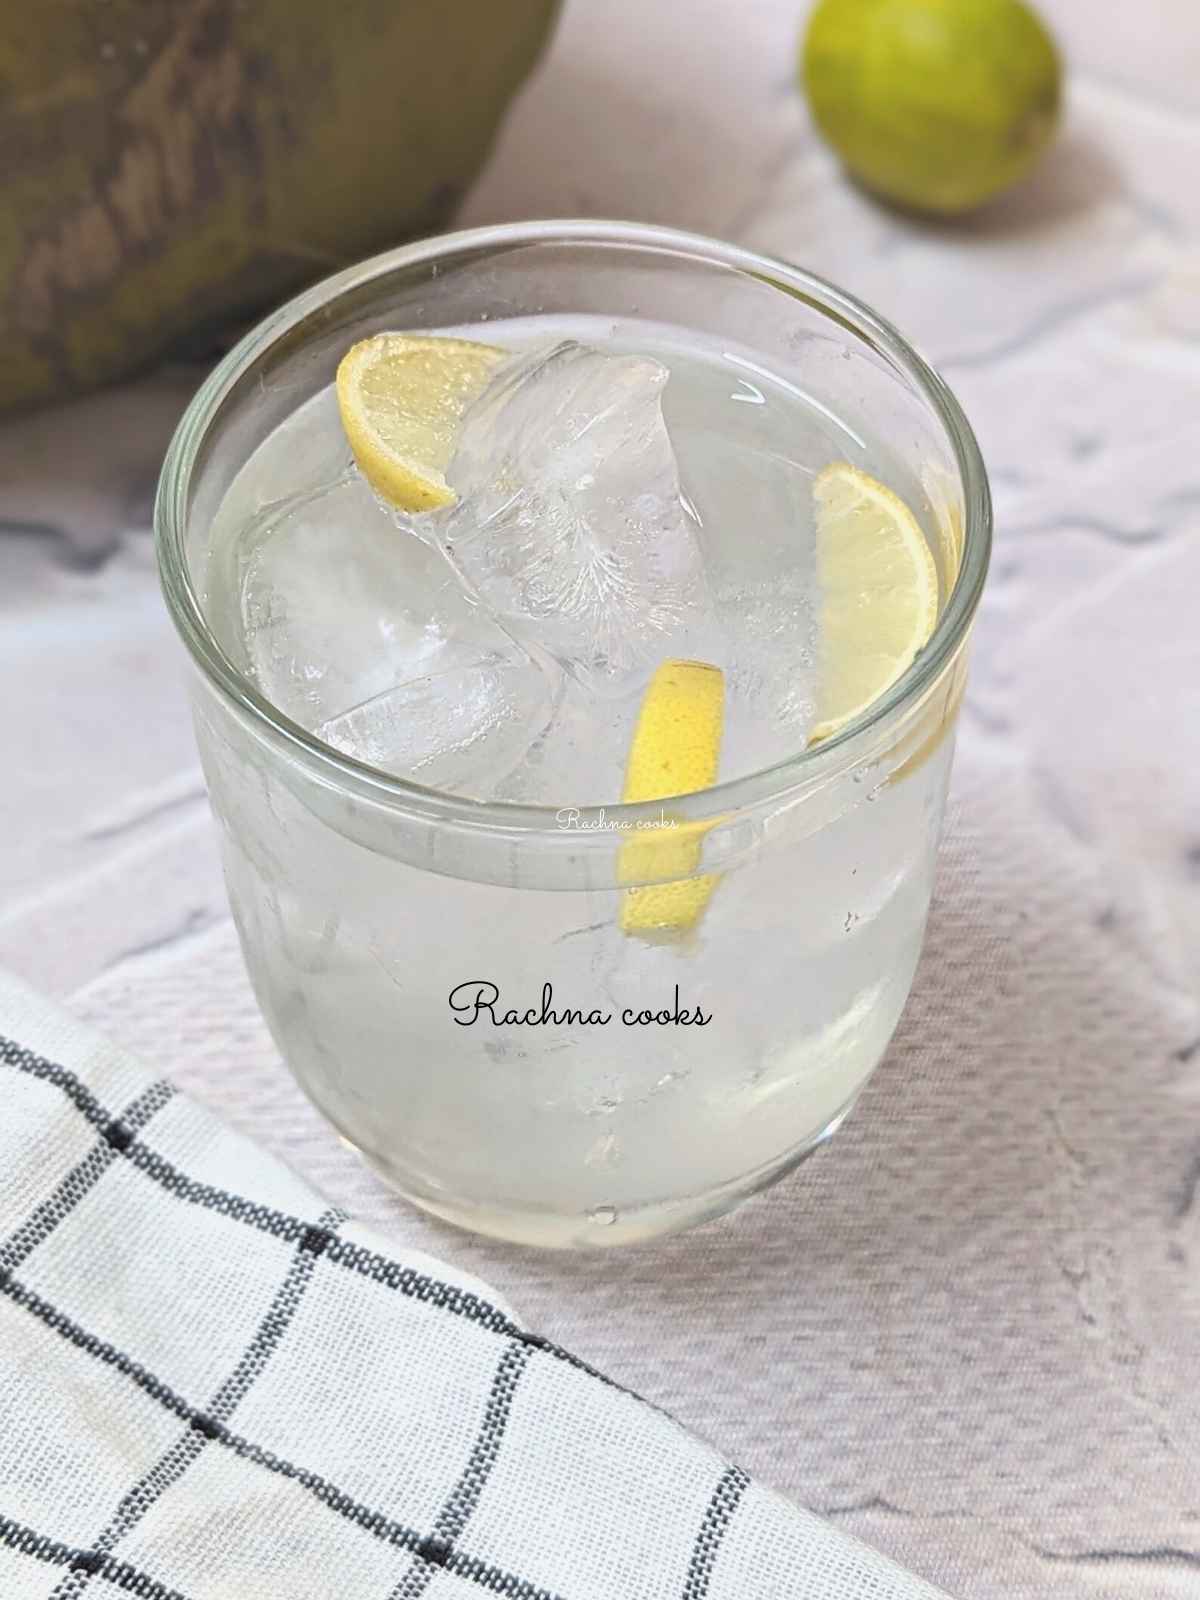 A glass of coconut water lemonade with lemon wedges.